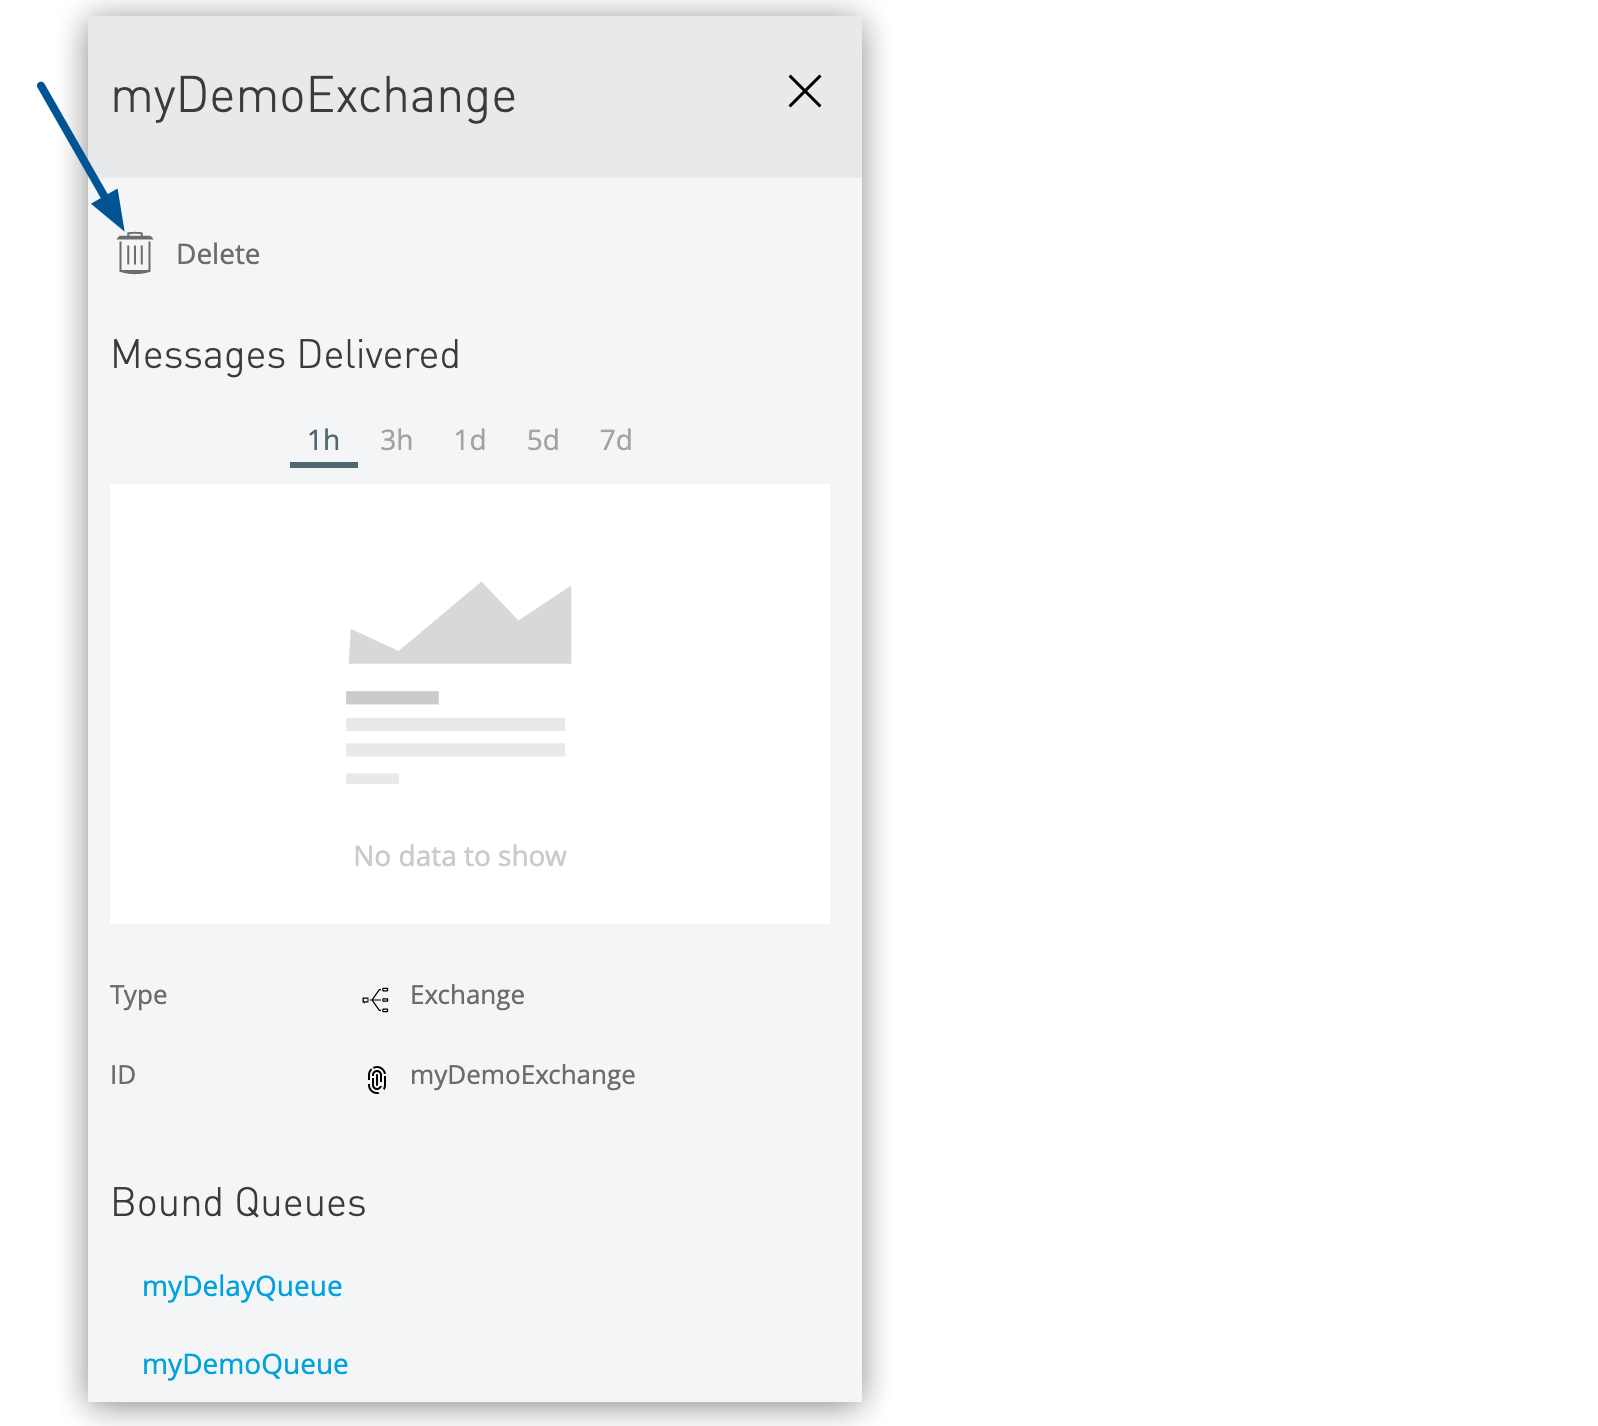 Delete icon in the details pane for deleting an exchange